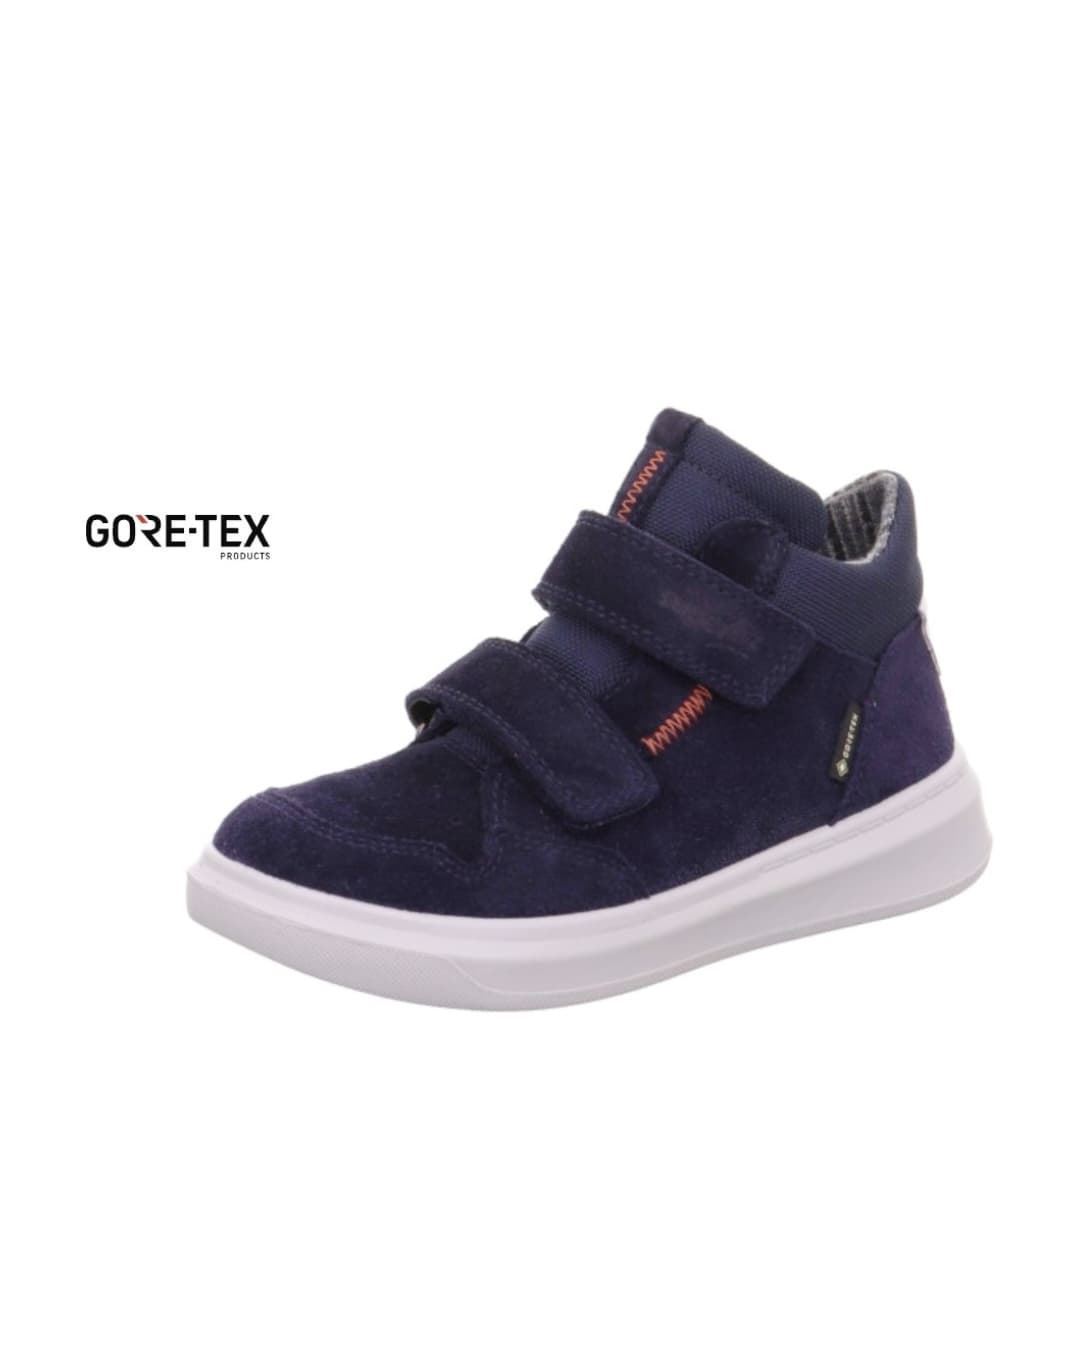 Superfit Gore-tex Boots for Kids Navy Blue - Image 1